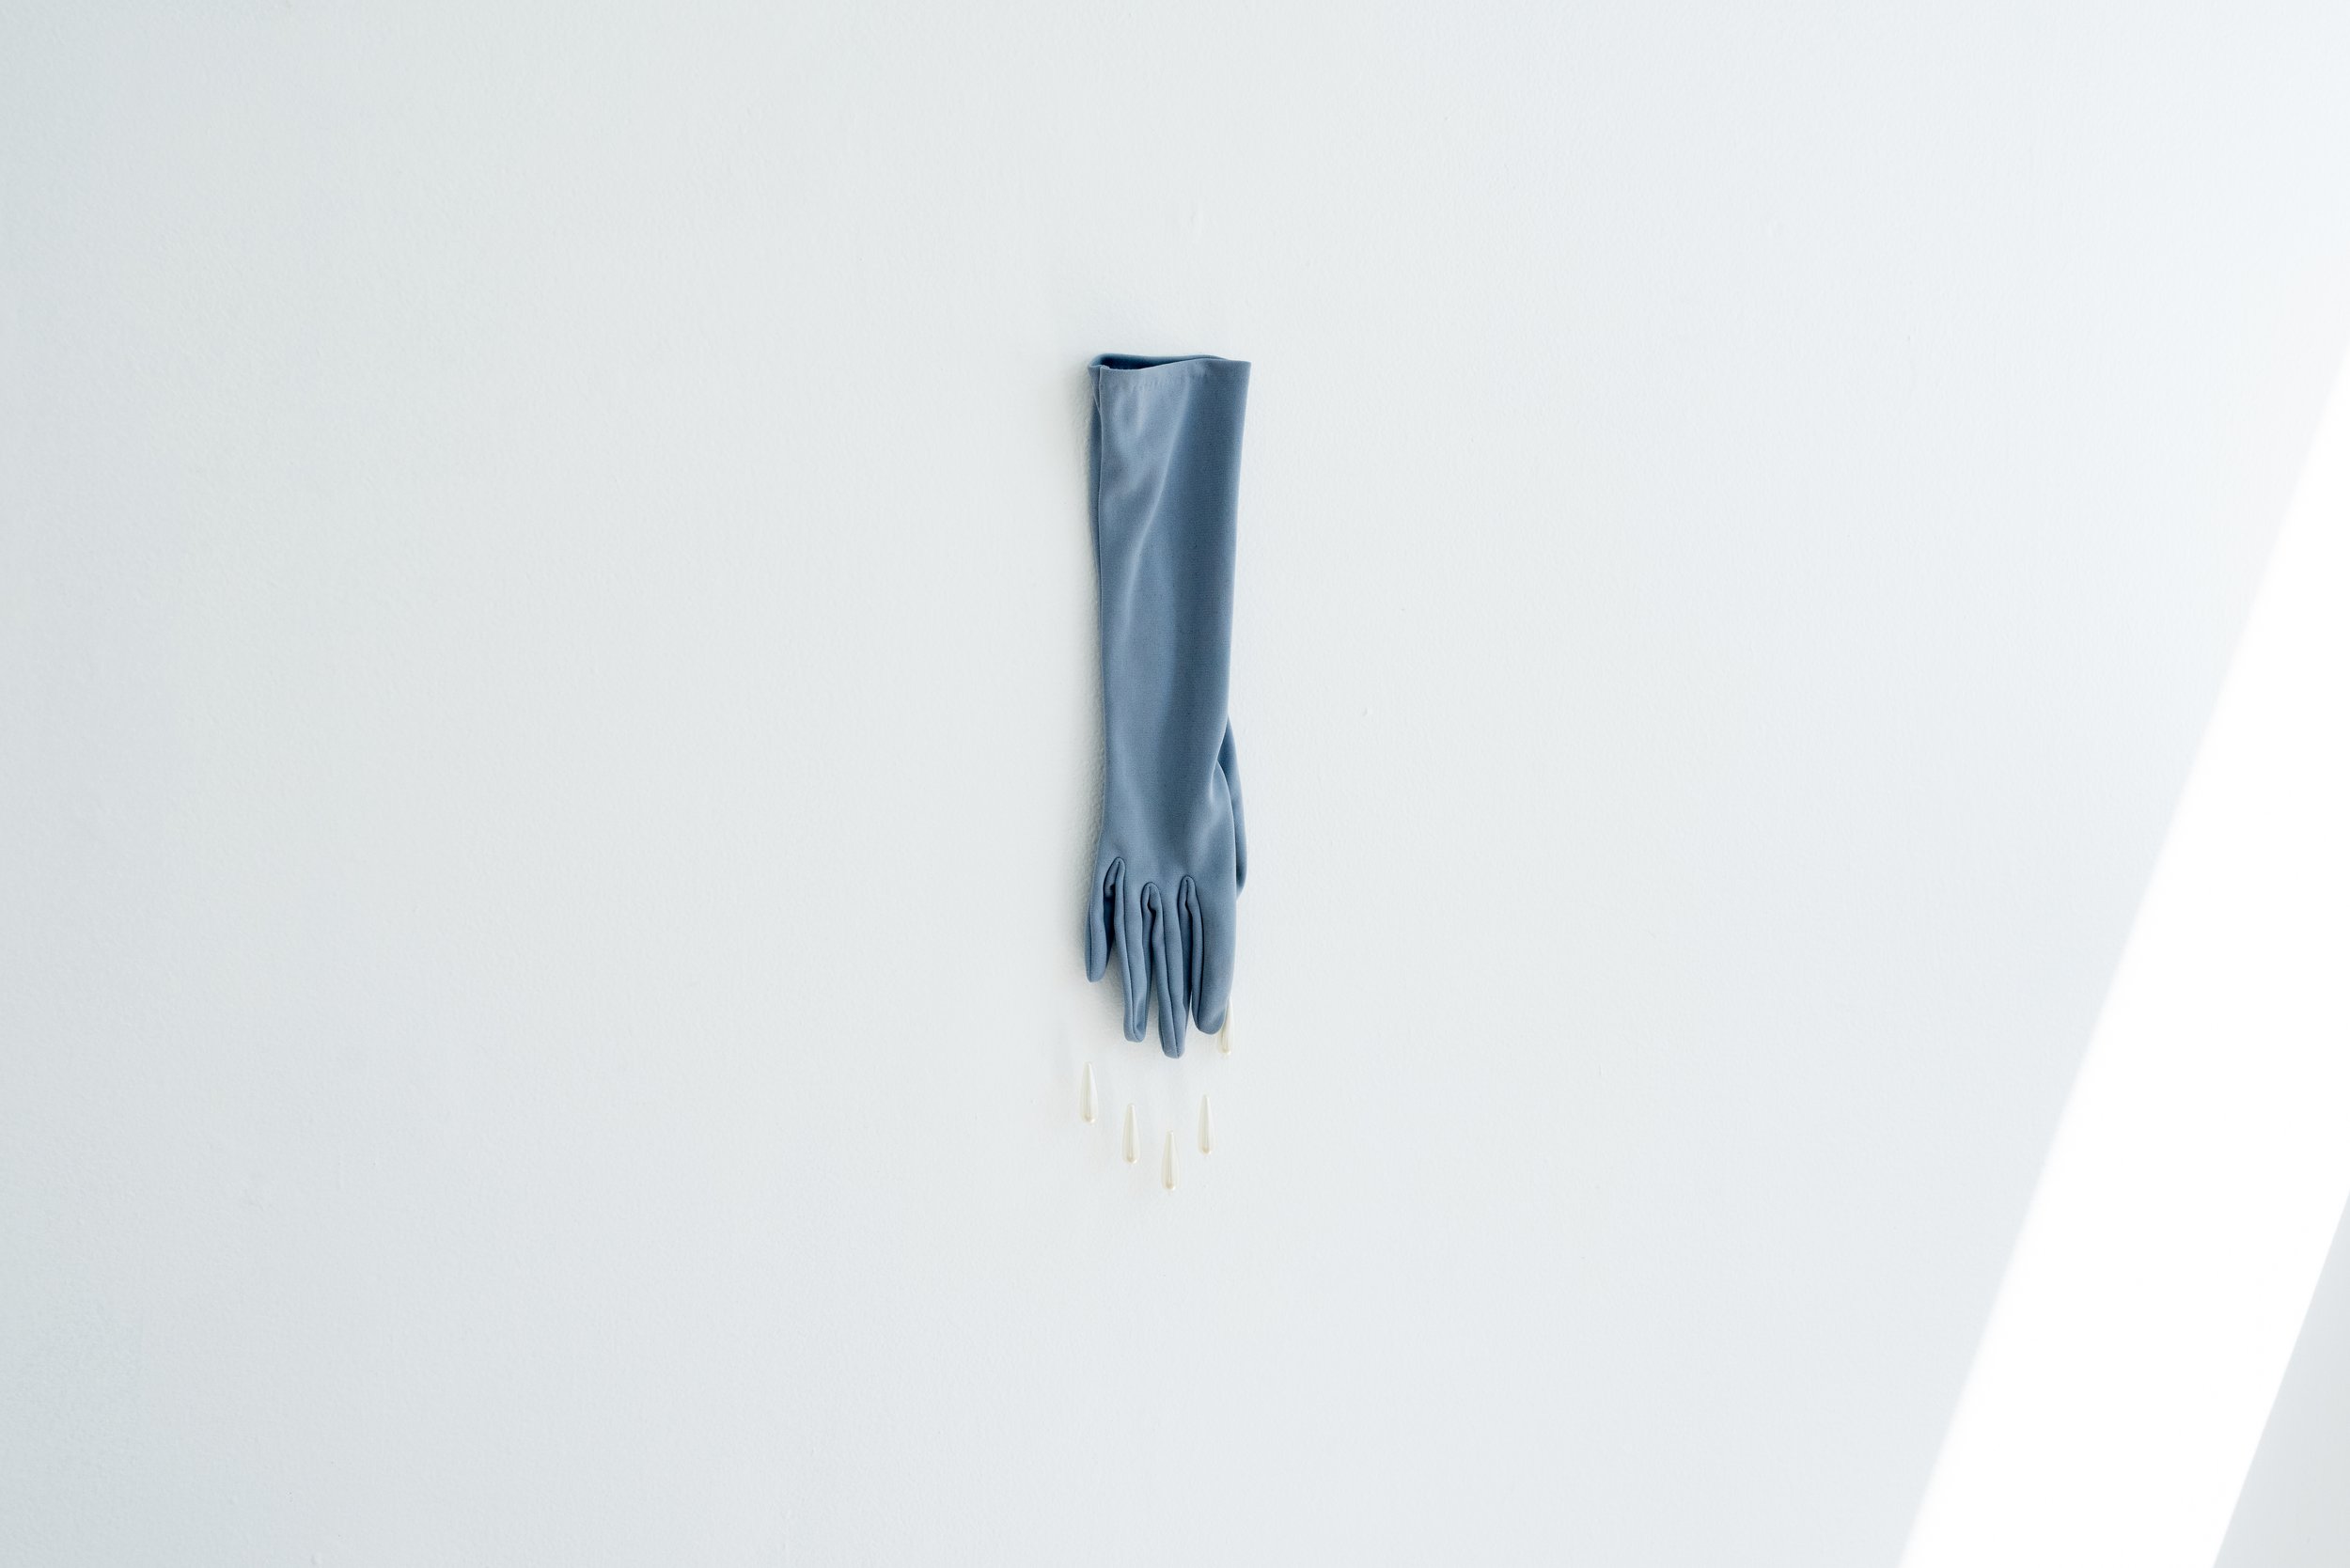  Mambo No. 7  Second-hand gloves, synthetic beads and cotton thread  9 x 40cm  2022  Photograph by Samantha Iliov 